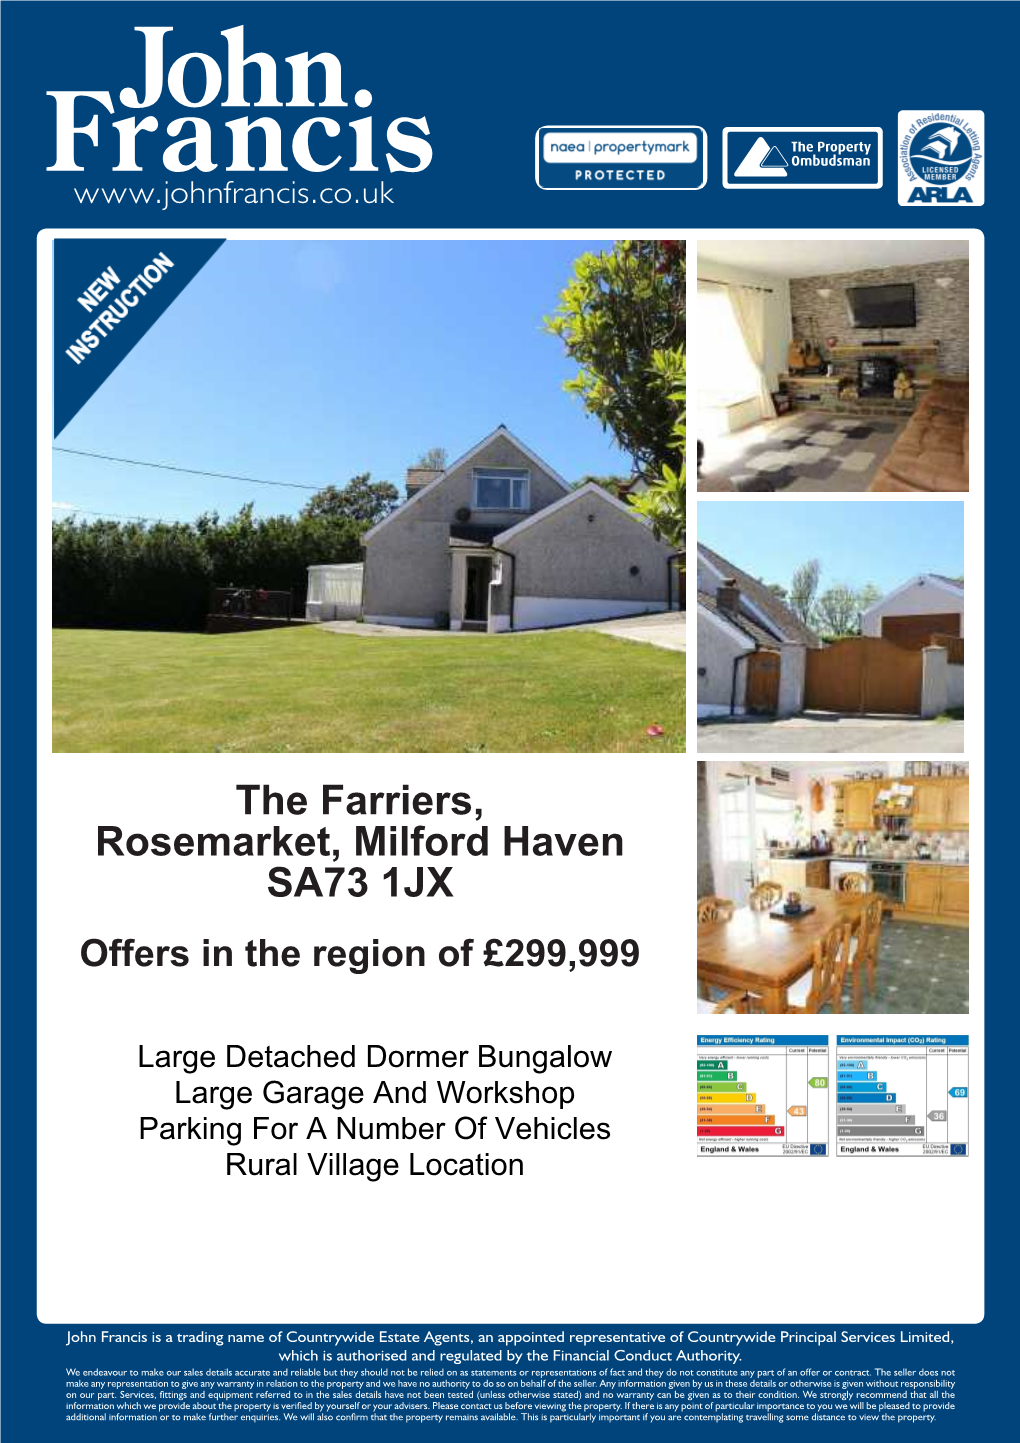 The Farriers, Rosemarket, Milford Haven SA73 1JX Offers in the Region of £299,999